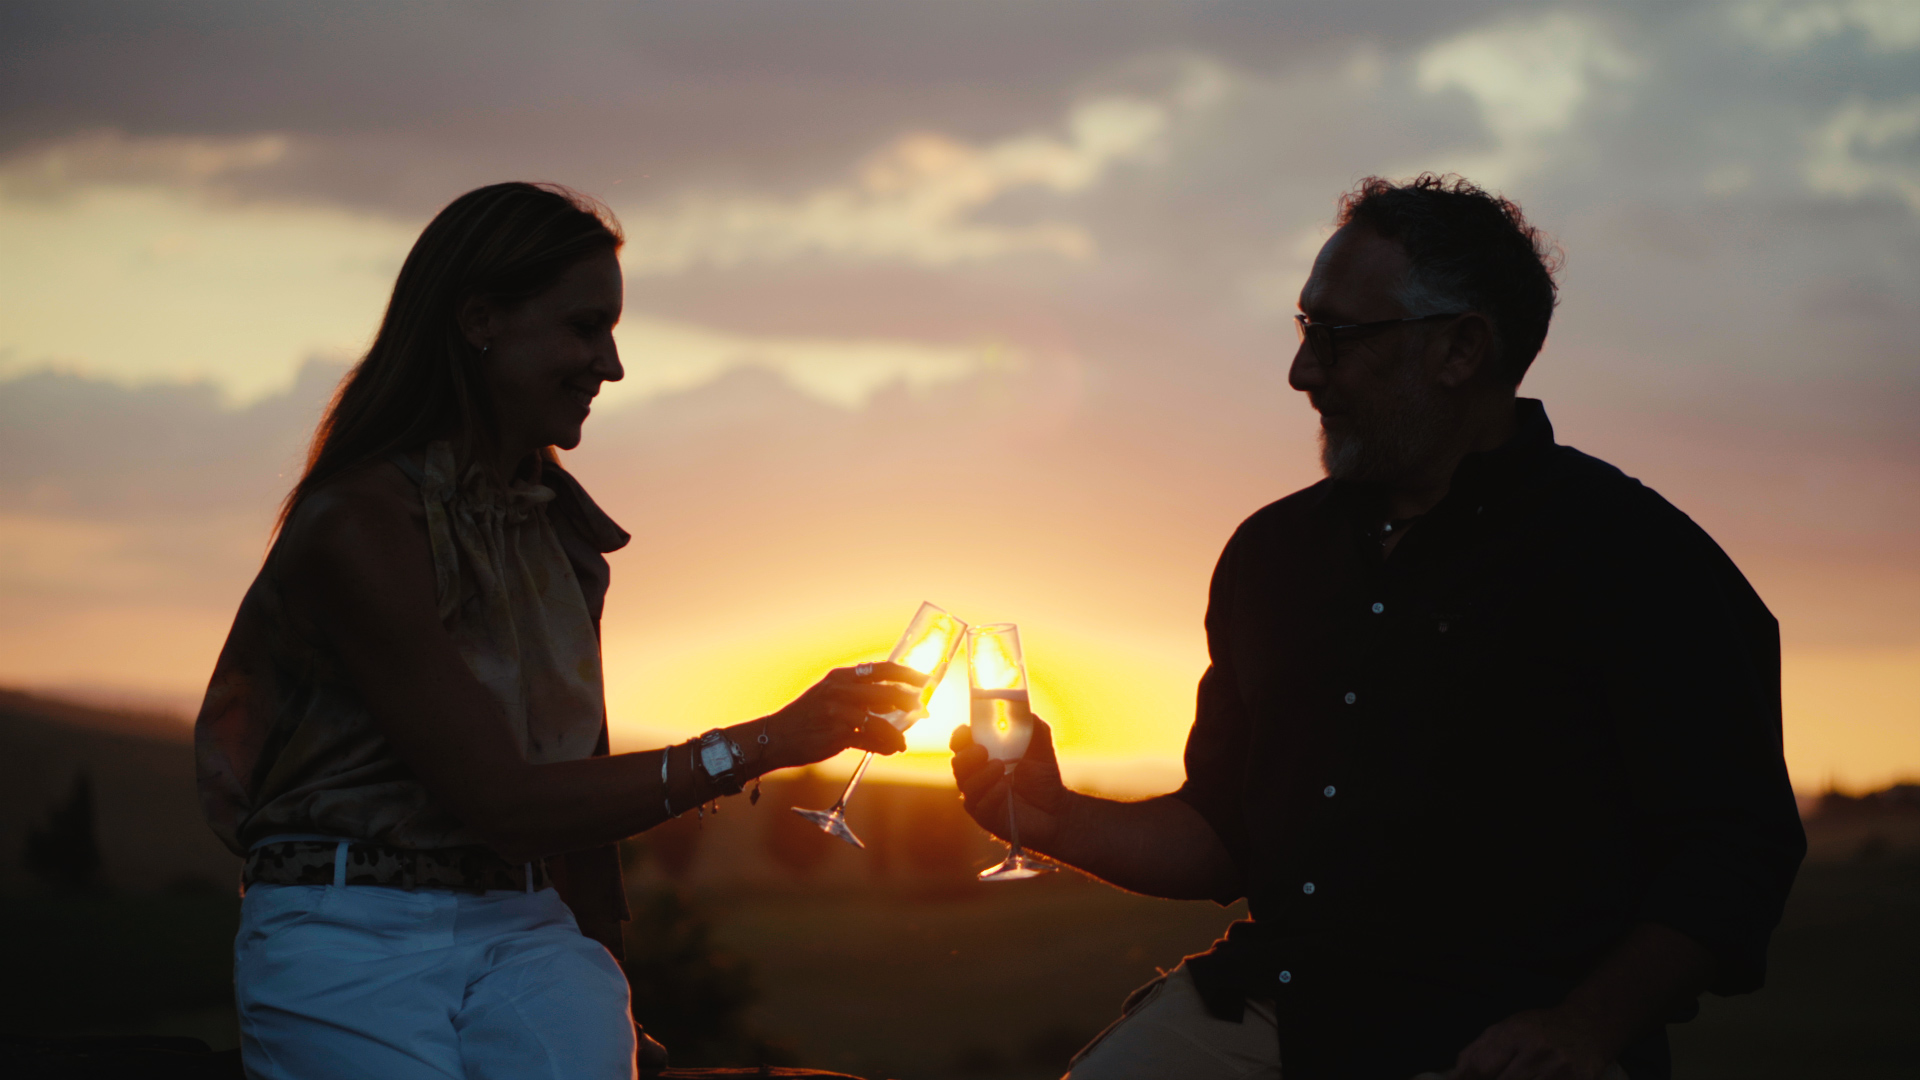 Man and woman raising wine glasses to toast at sunset